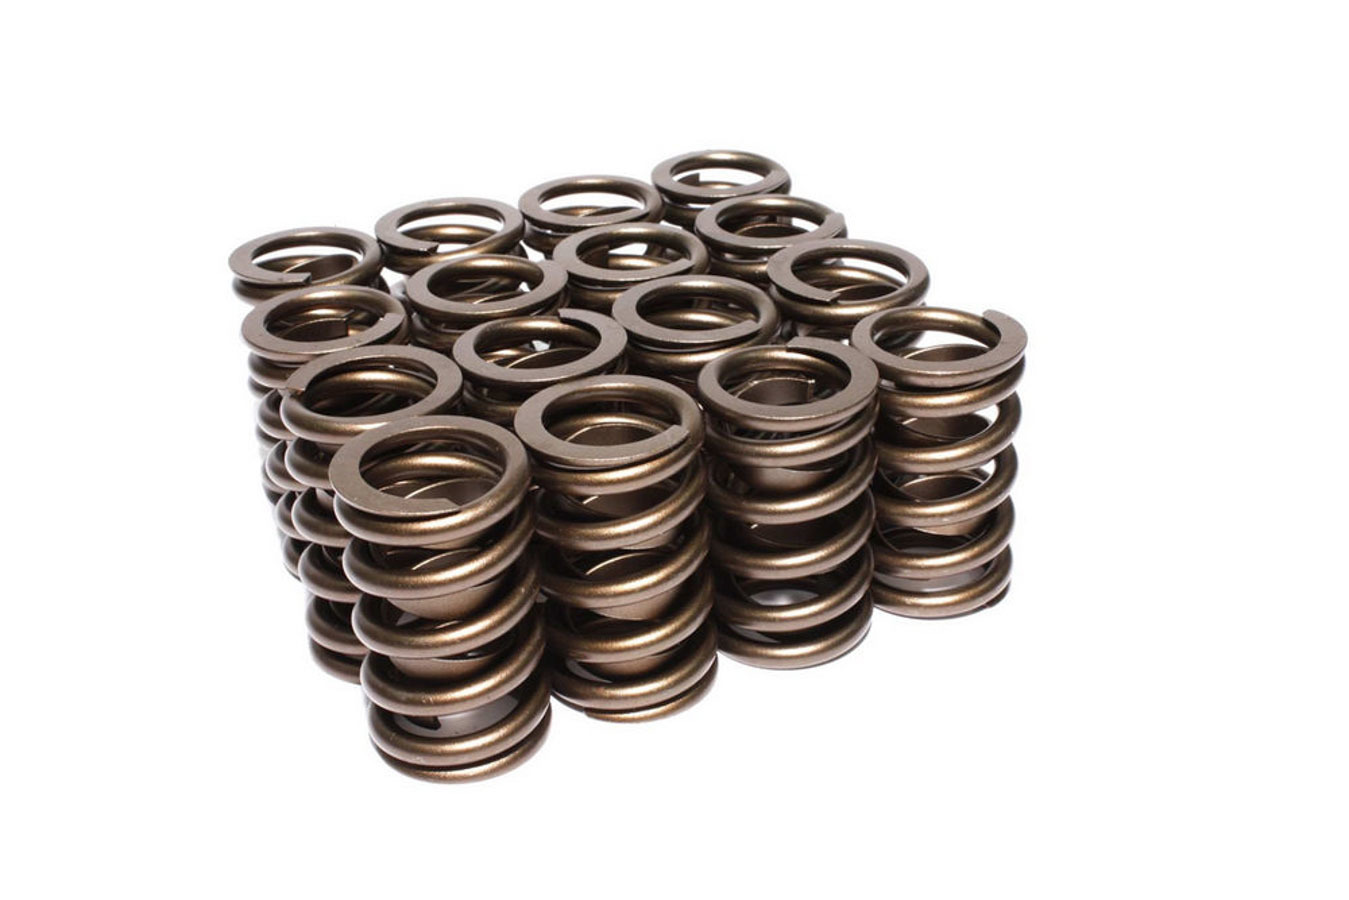 COMP Cams Set of 16 Single Springs w/ 1.254" O.D., 1.254" I.D., 1.700" Installed